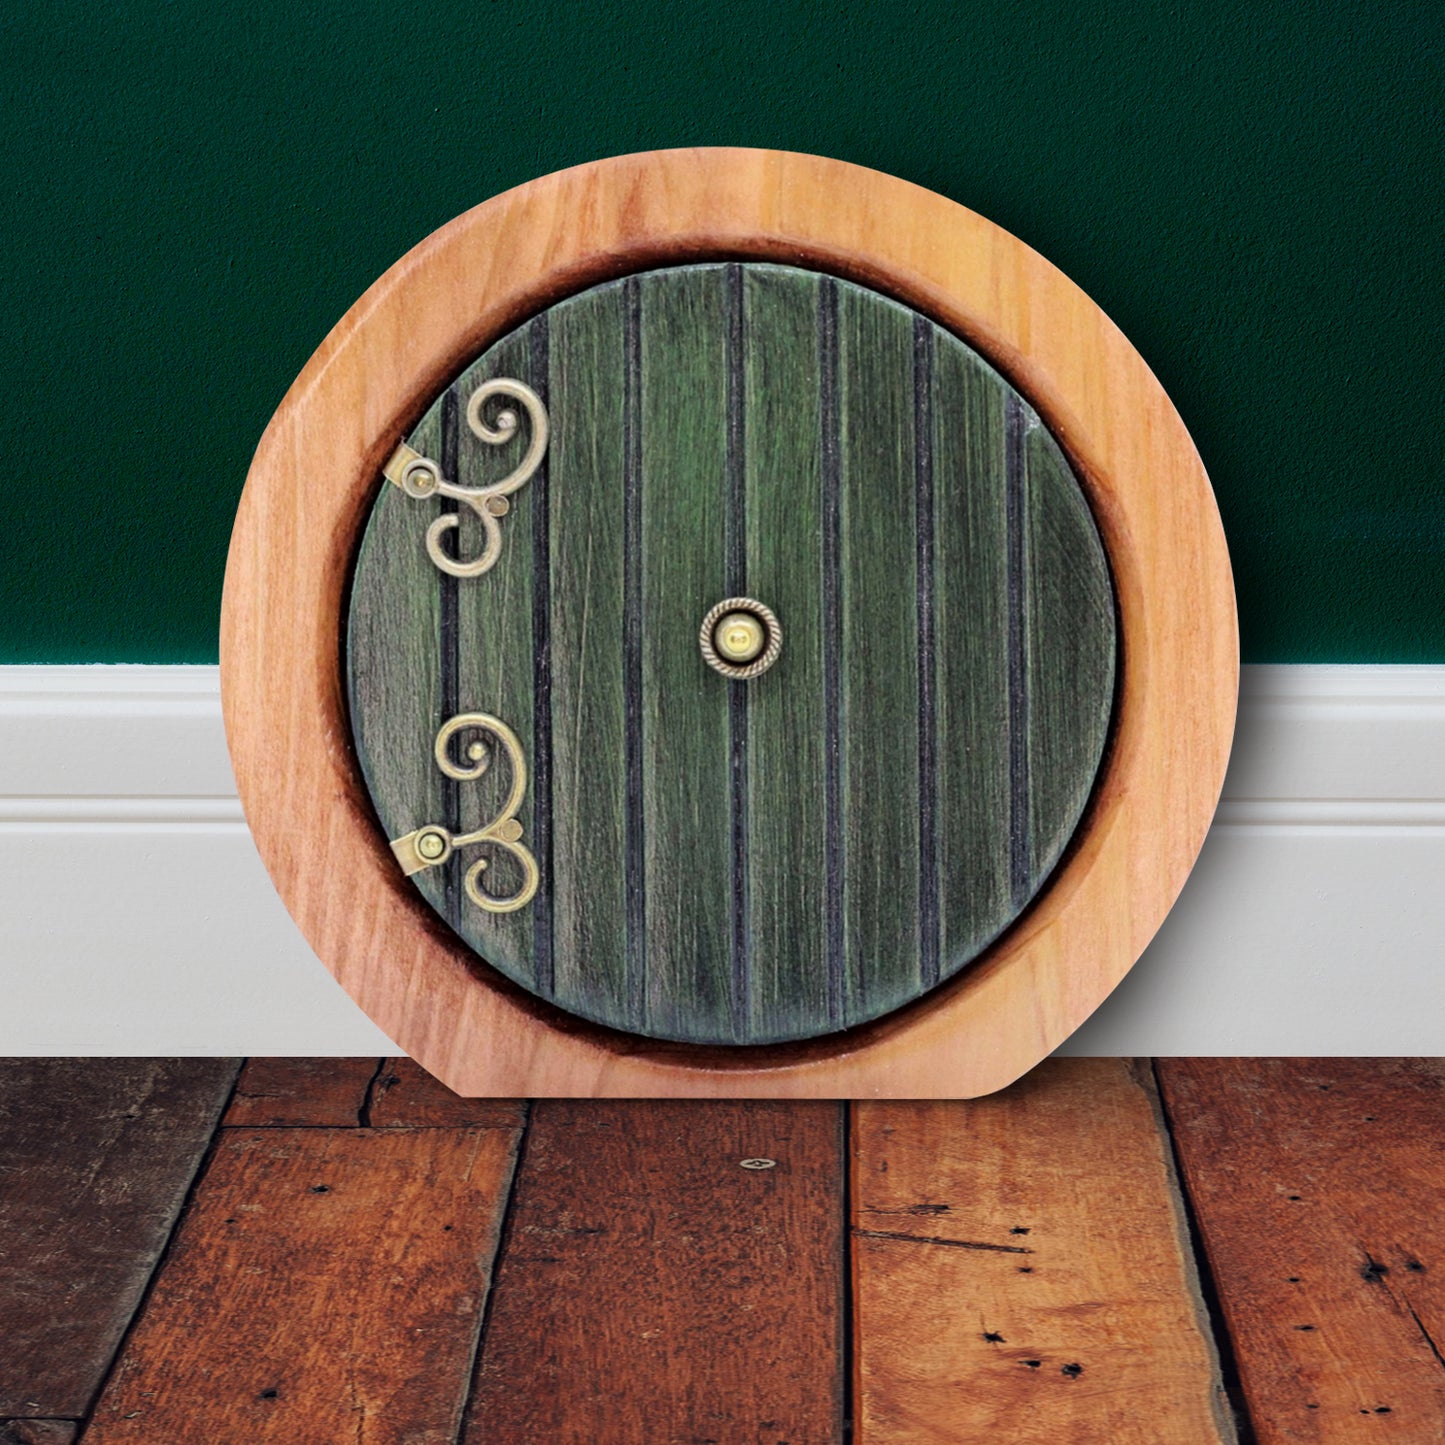 Load image into Gallery viewer, A round wooden doorframe with a green door on a wooden floor, against a white baseboard and green wall. The door has ornate brass hinges at the side, and a brass doorknob in the center. 
